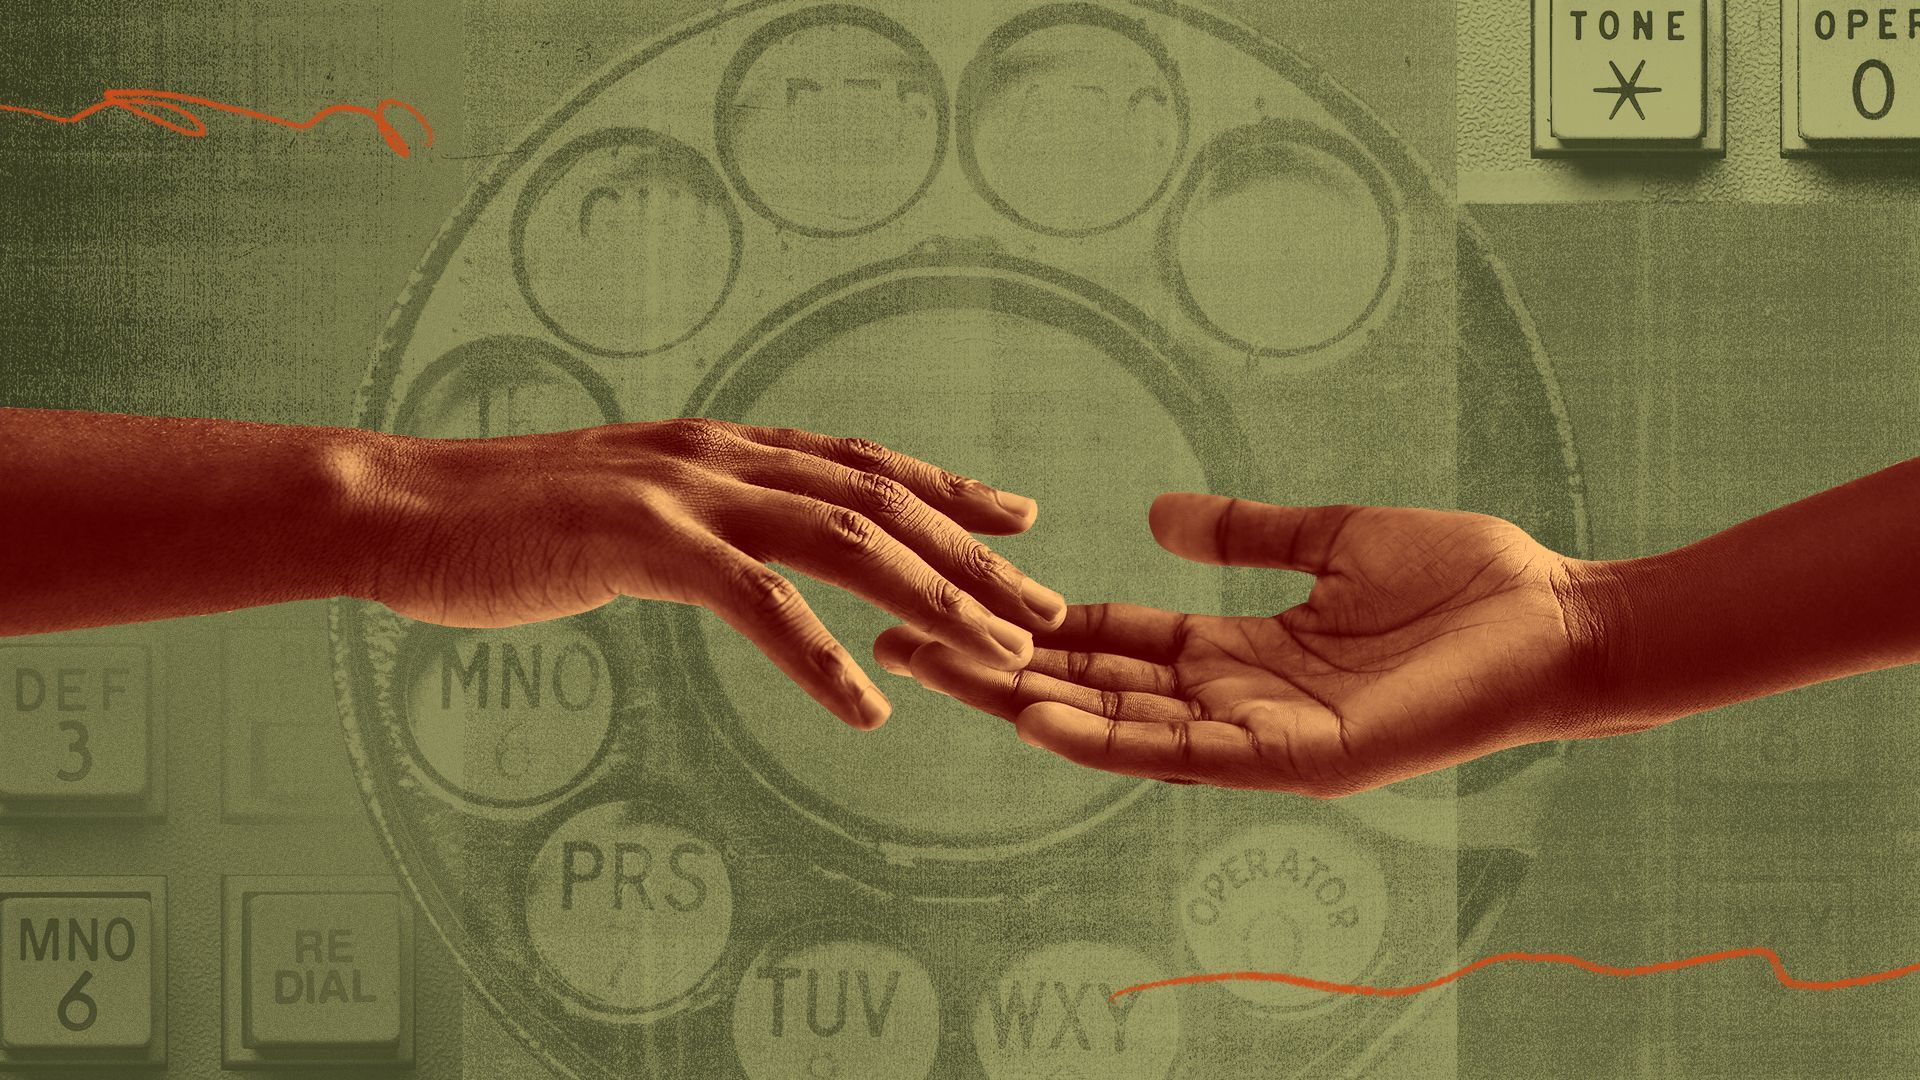 Photo illustration of two hands reaching out to each other, with abstract shapes and old telephones. 